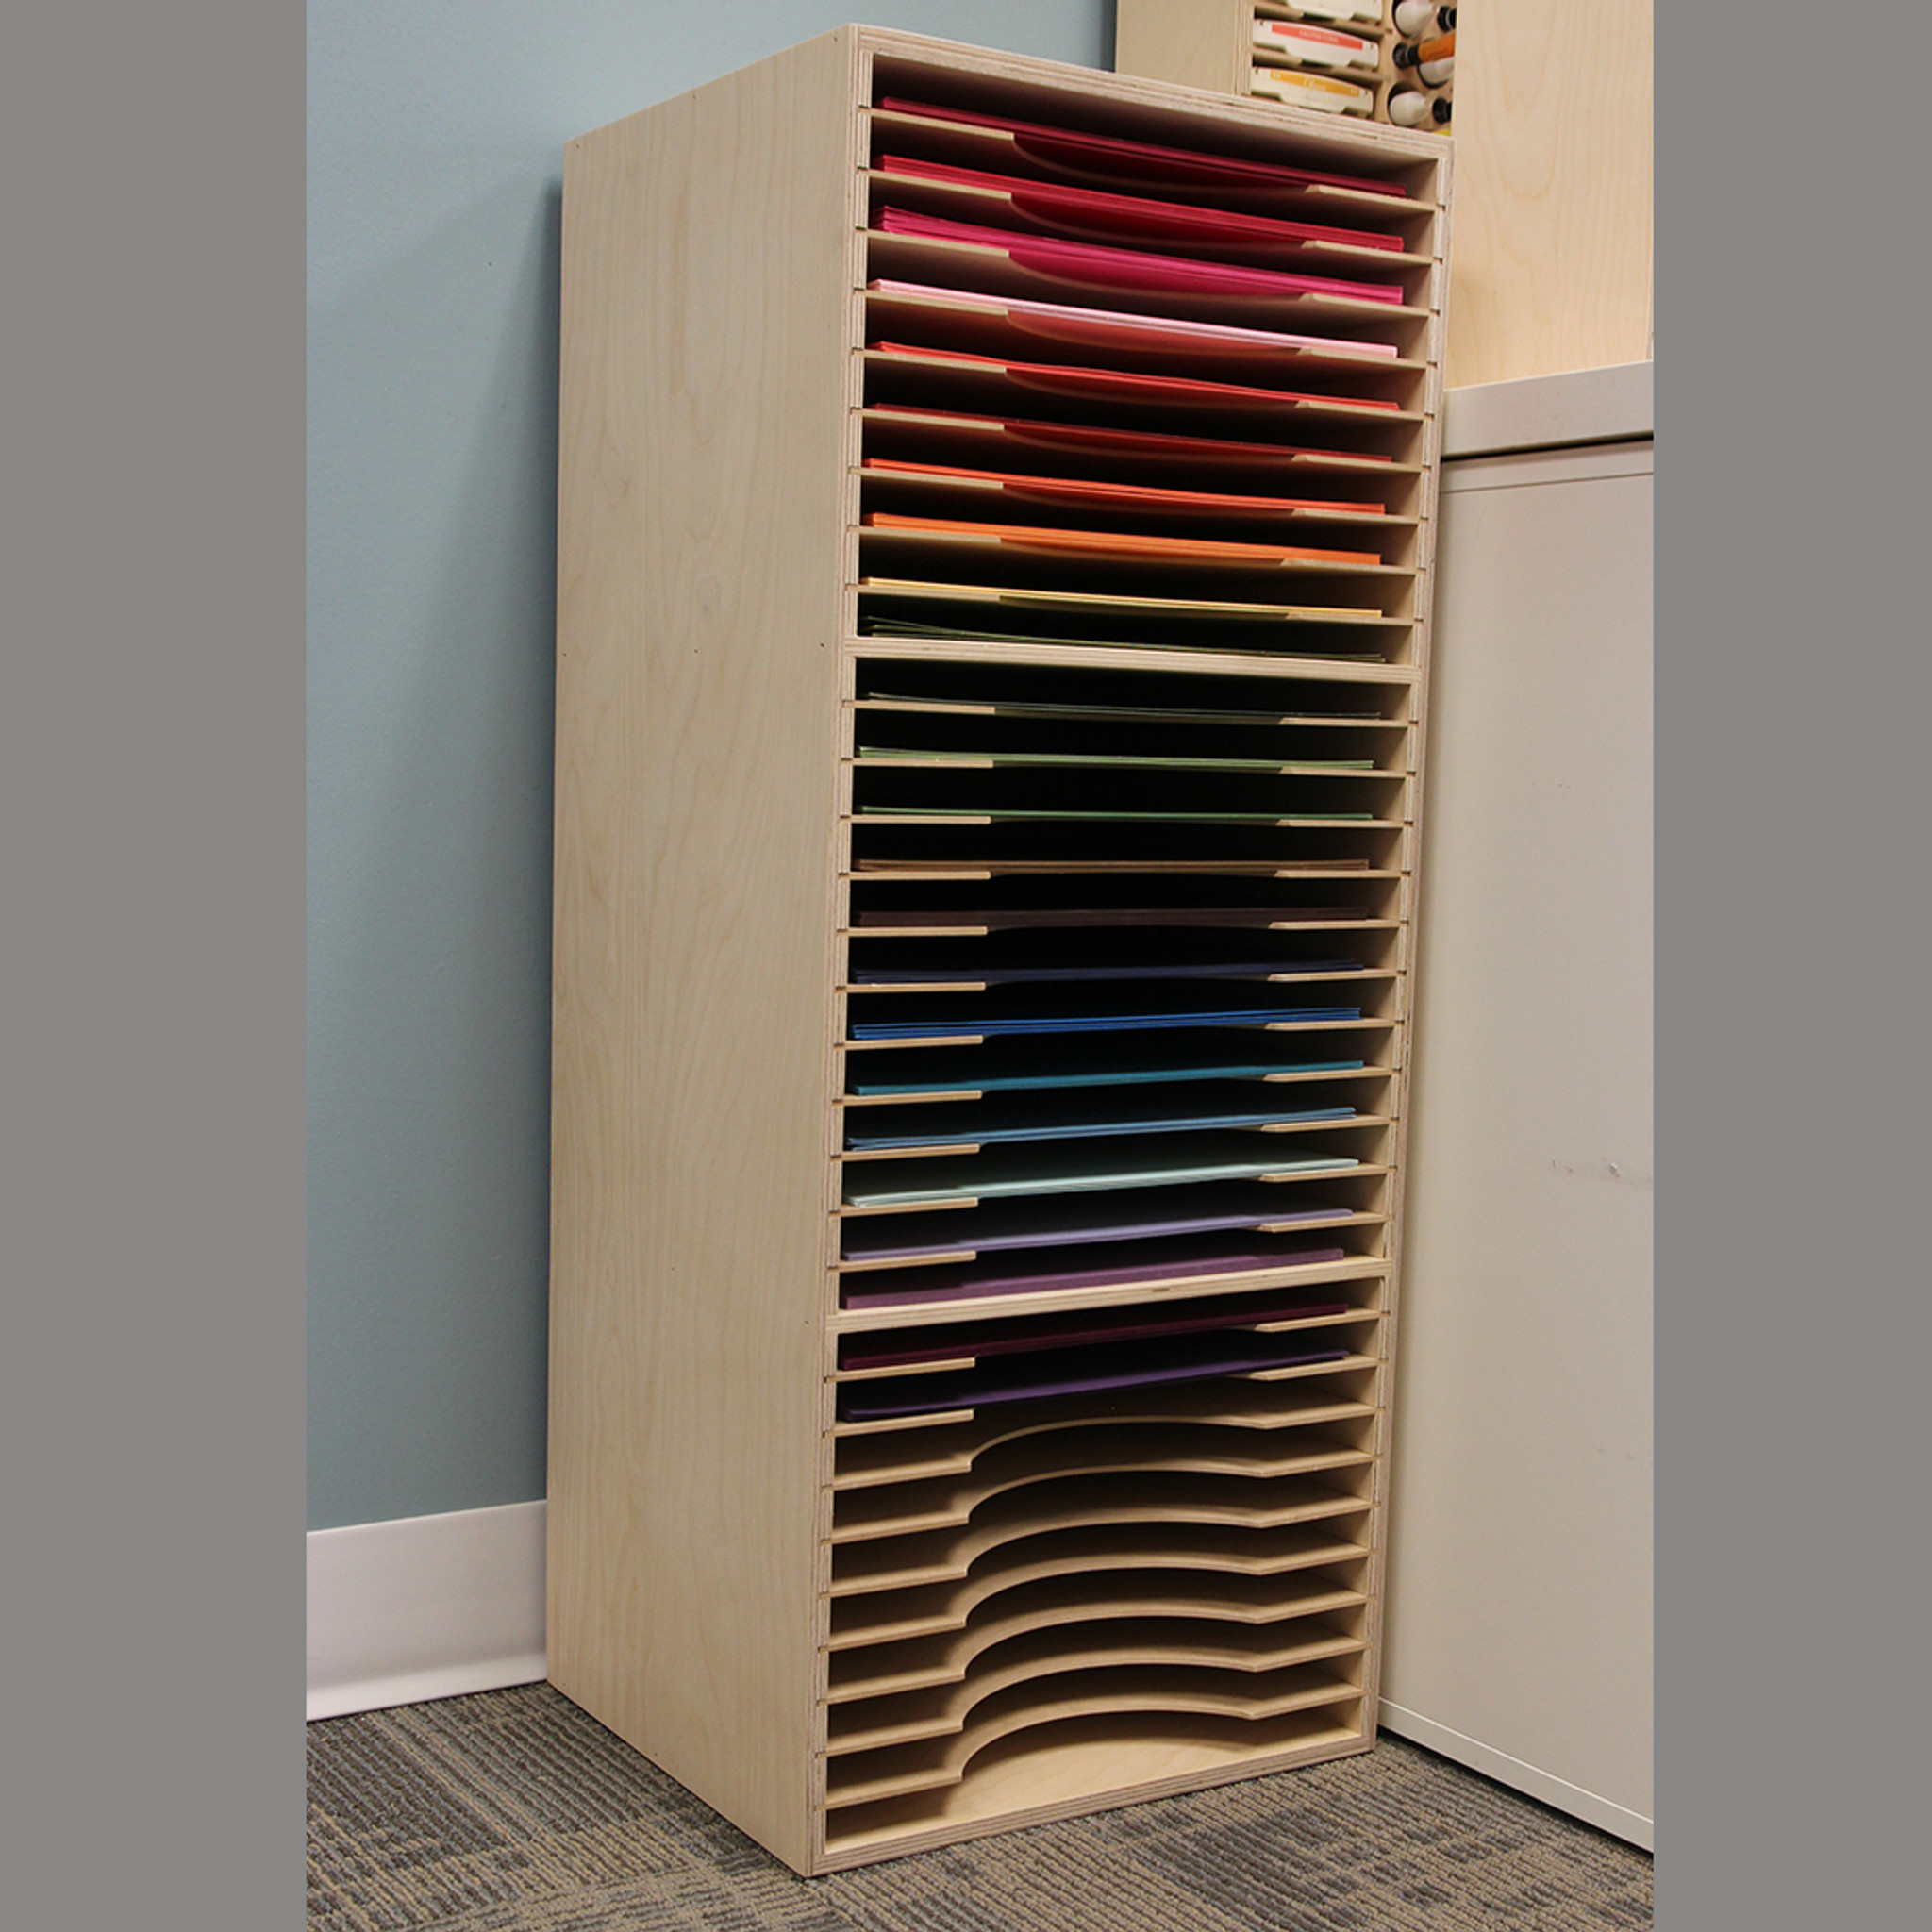 12x12 Paper Wire Shelf - Shipping INCLUDED to most US locations